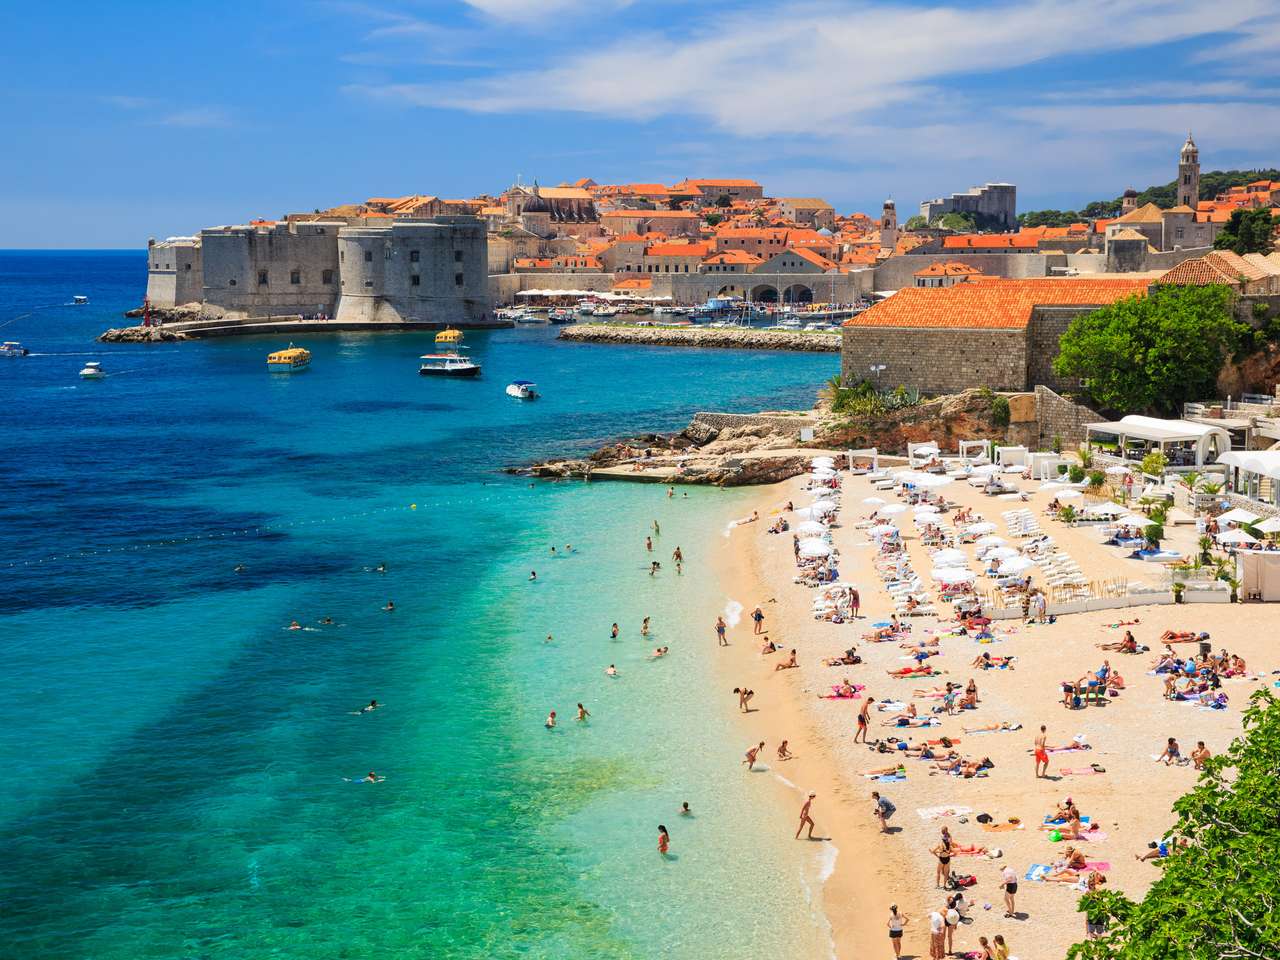 Old town fortress & beach, Dubrovnik Croatia online puzzle